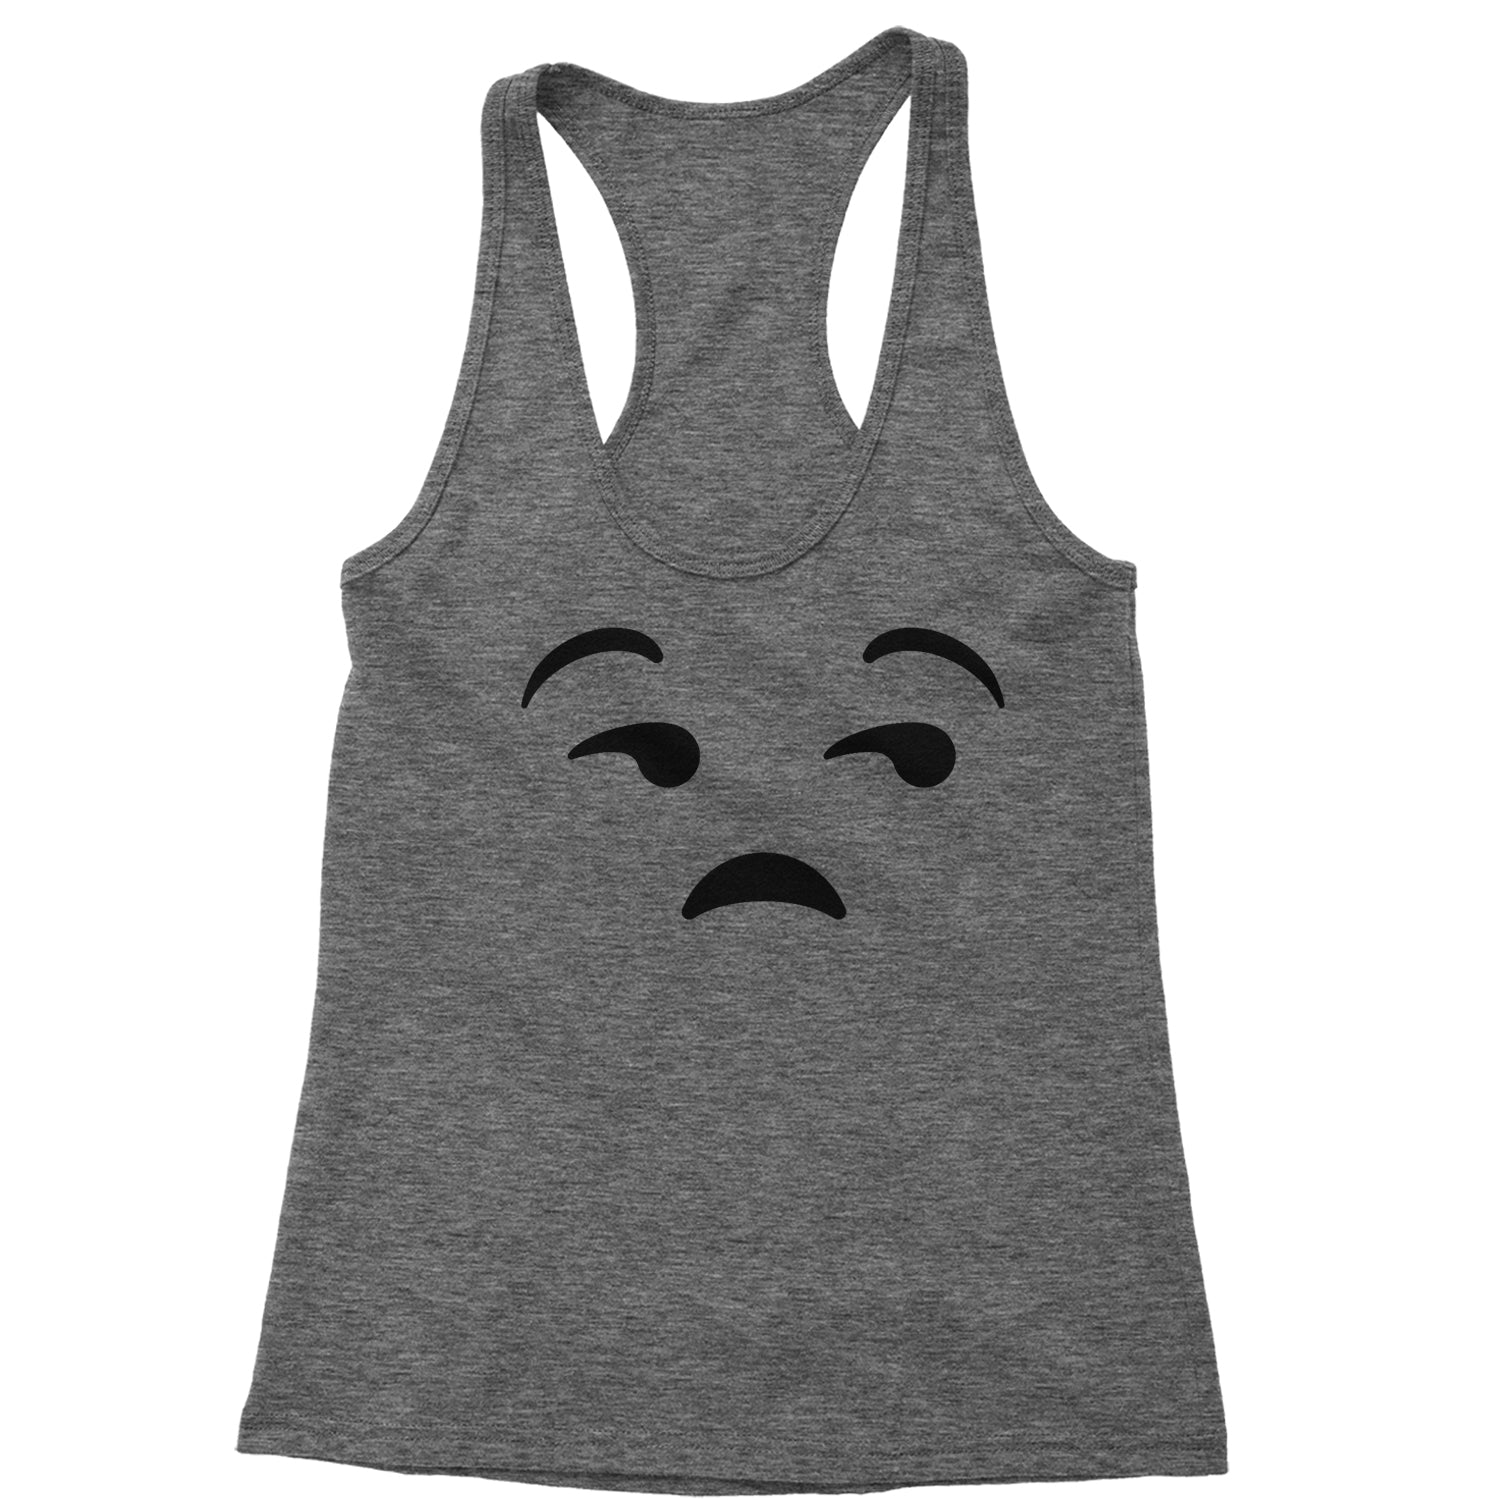 Emoticon Whatever Smile Face Racerback Tank Top for Women cosplay, costume, dress, emoji, emote, face, halloween, smiley, up, yellow by Expression Tees